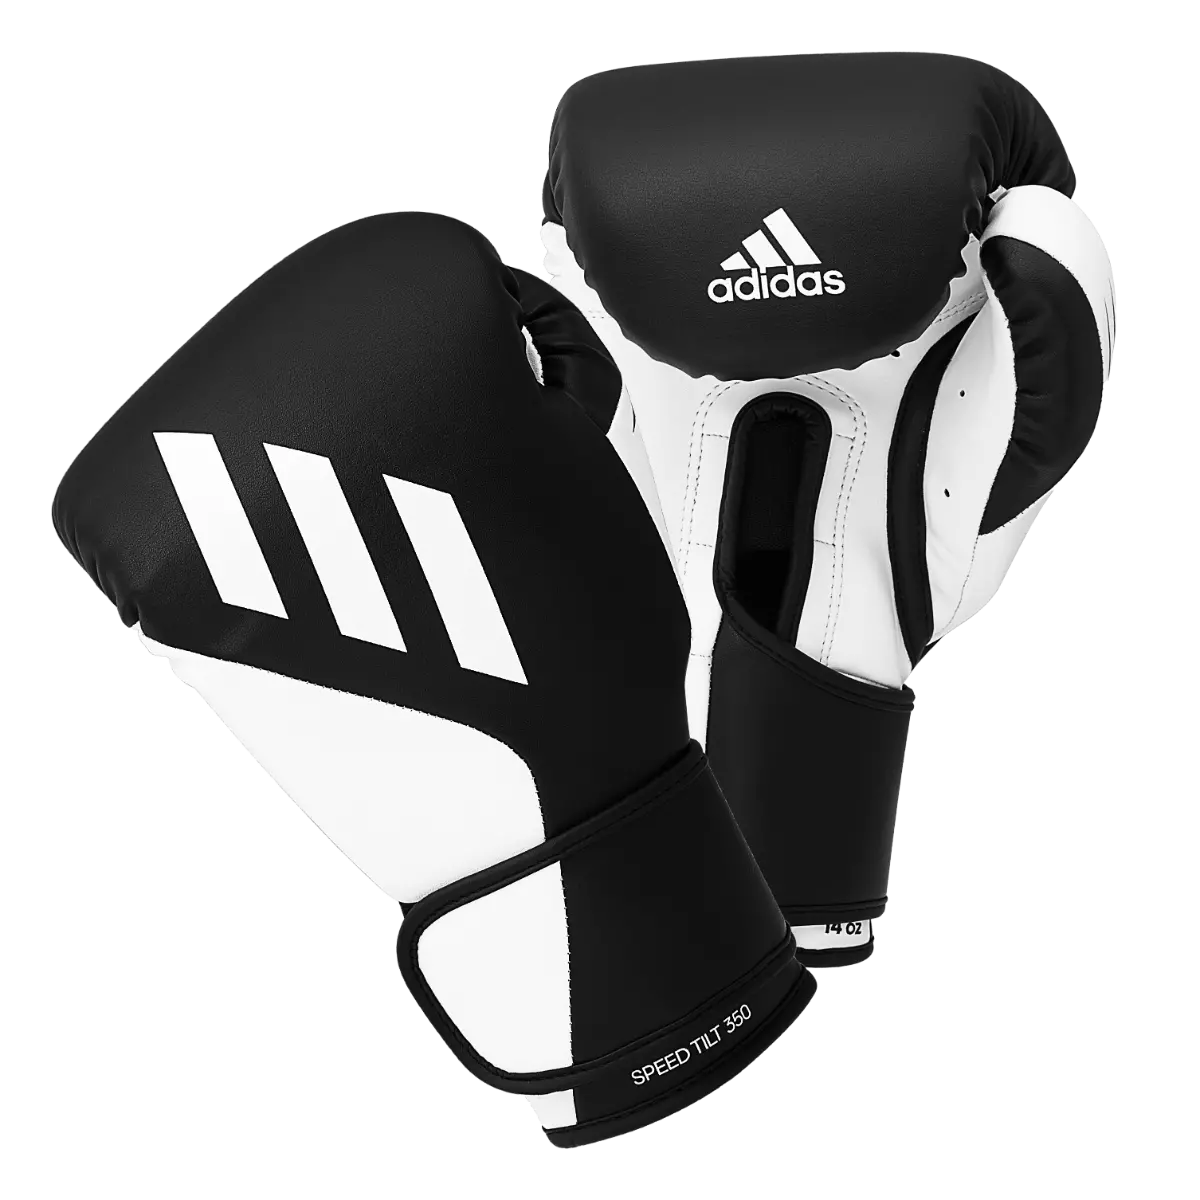 adidas Tilt 350 Pro Boxing Gloves Mexican Cactus Leather